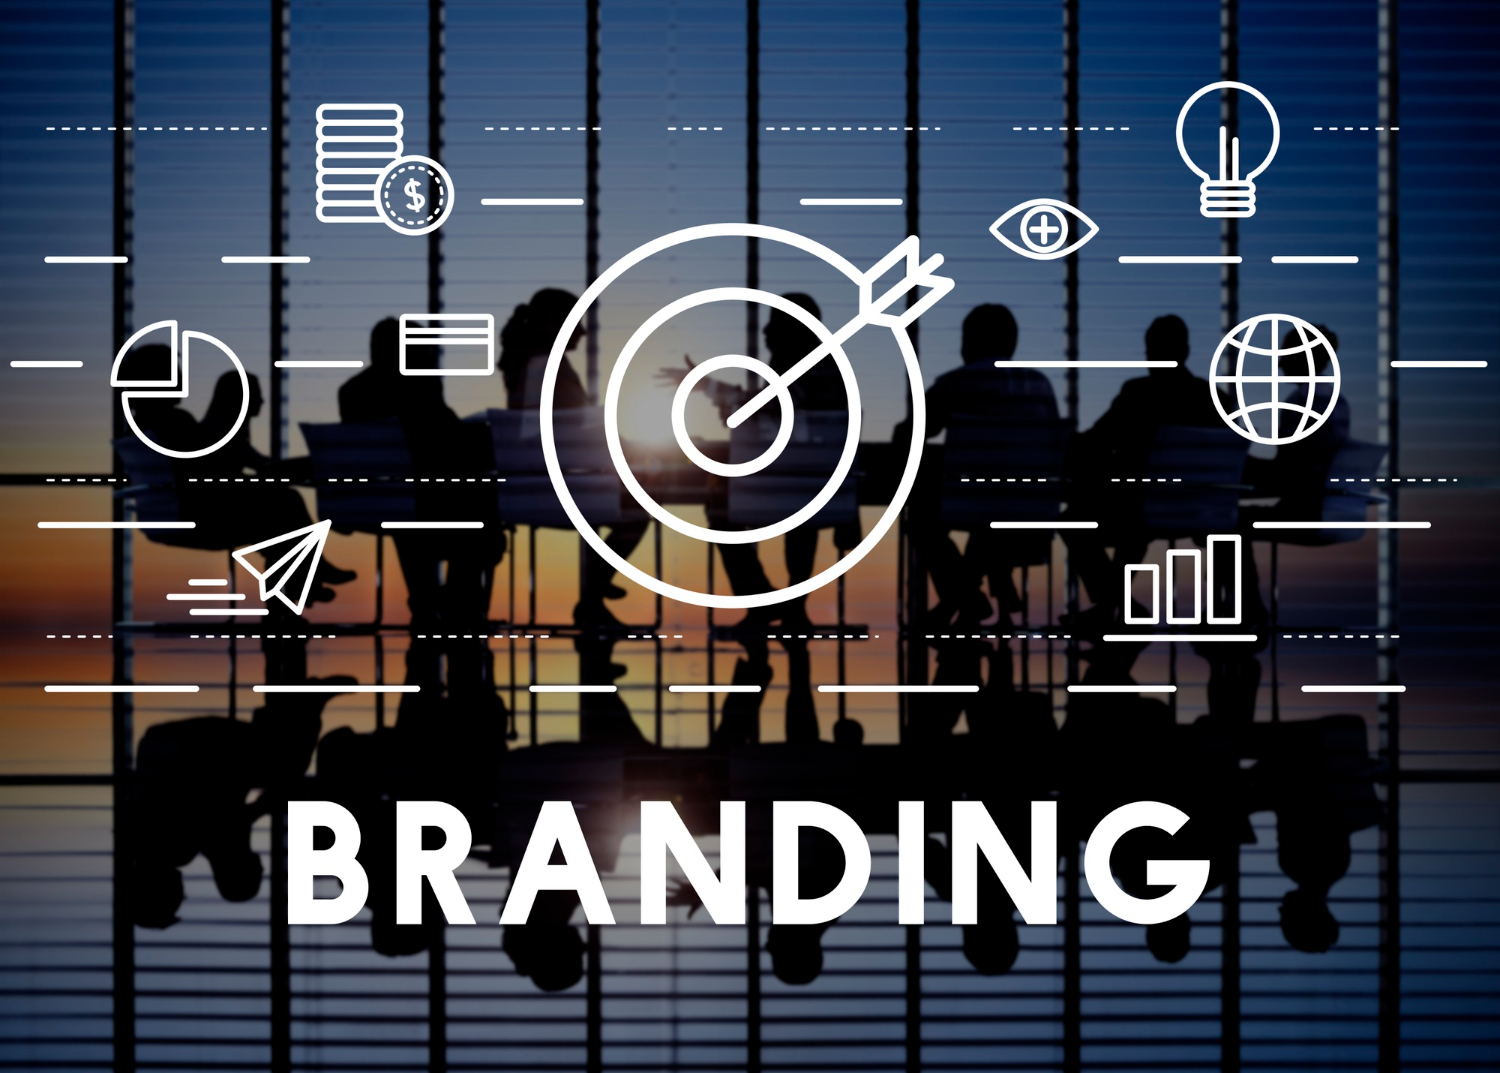 Branding image with icons